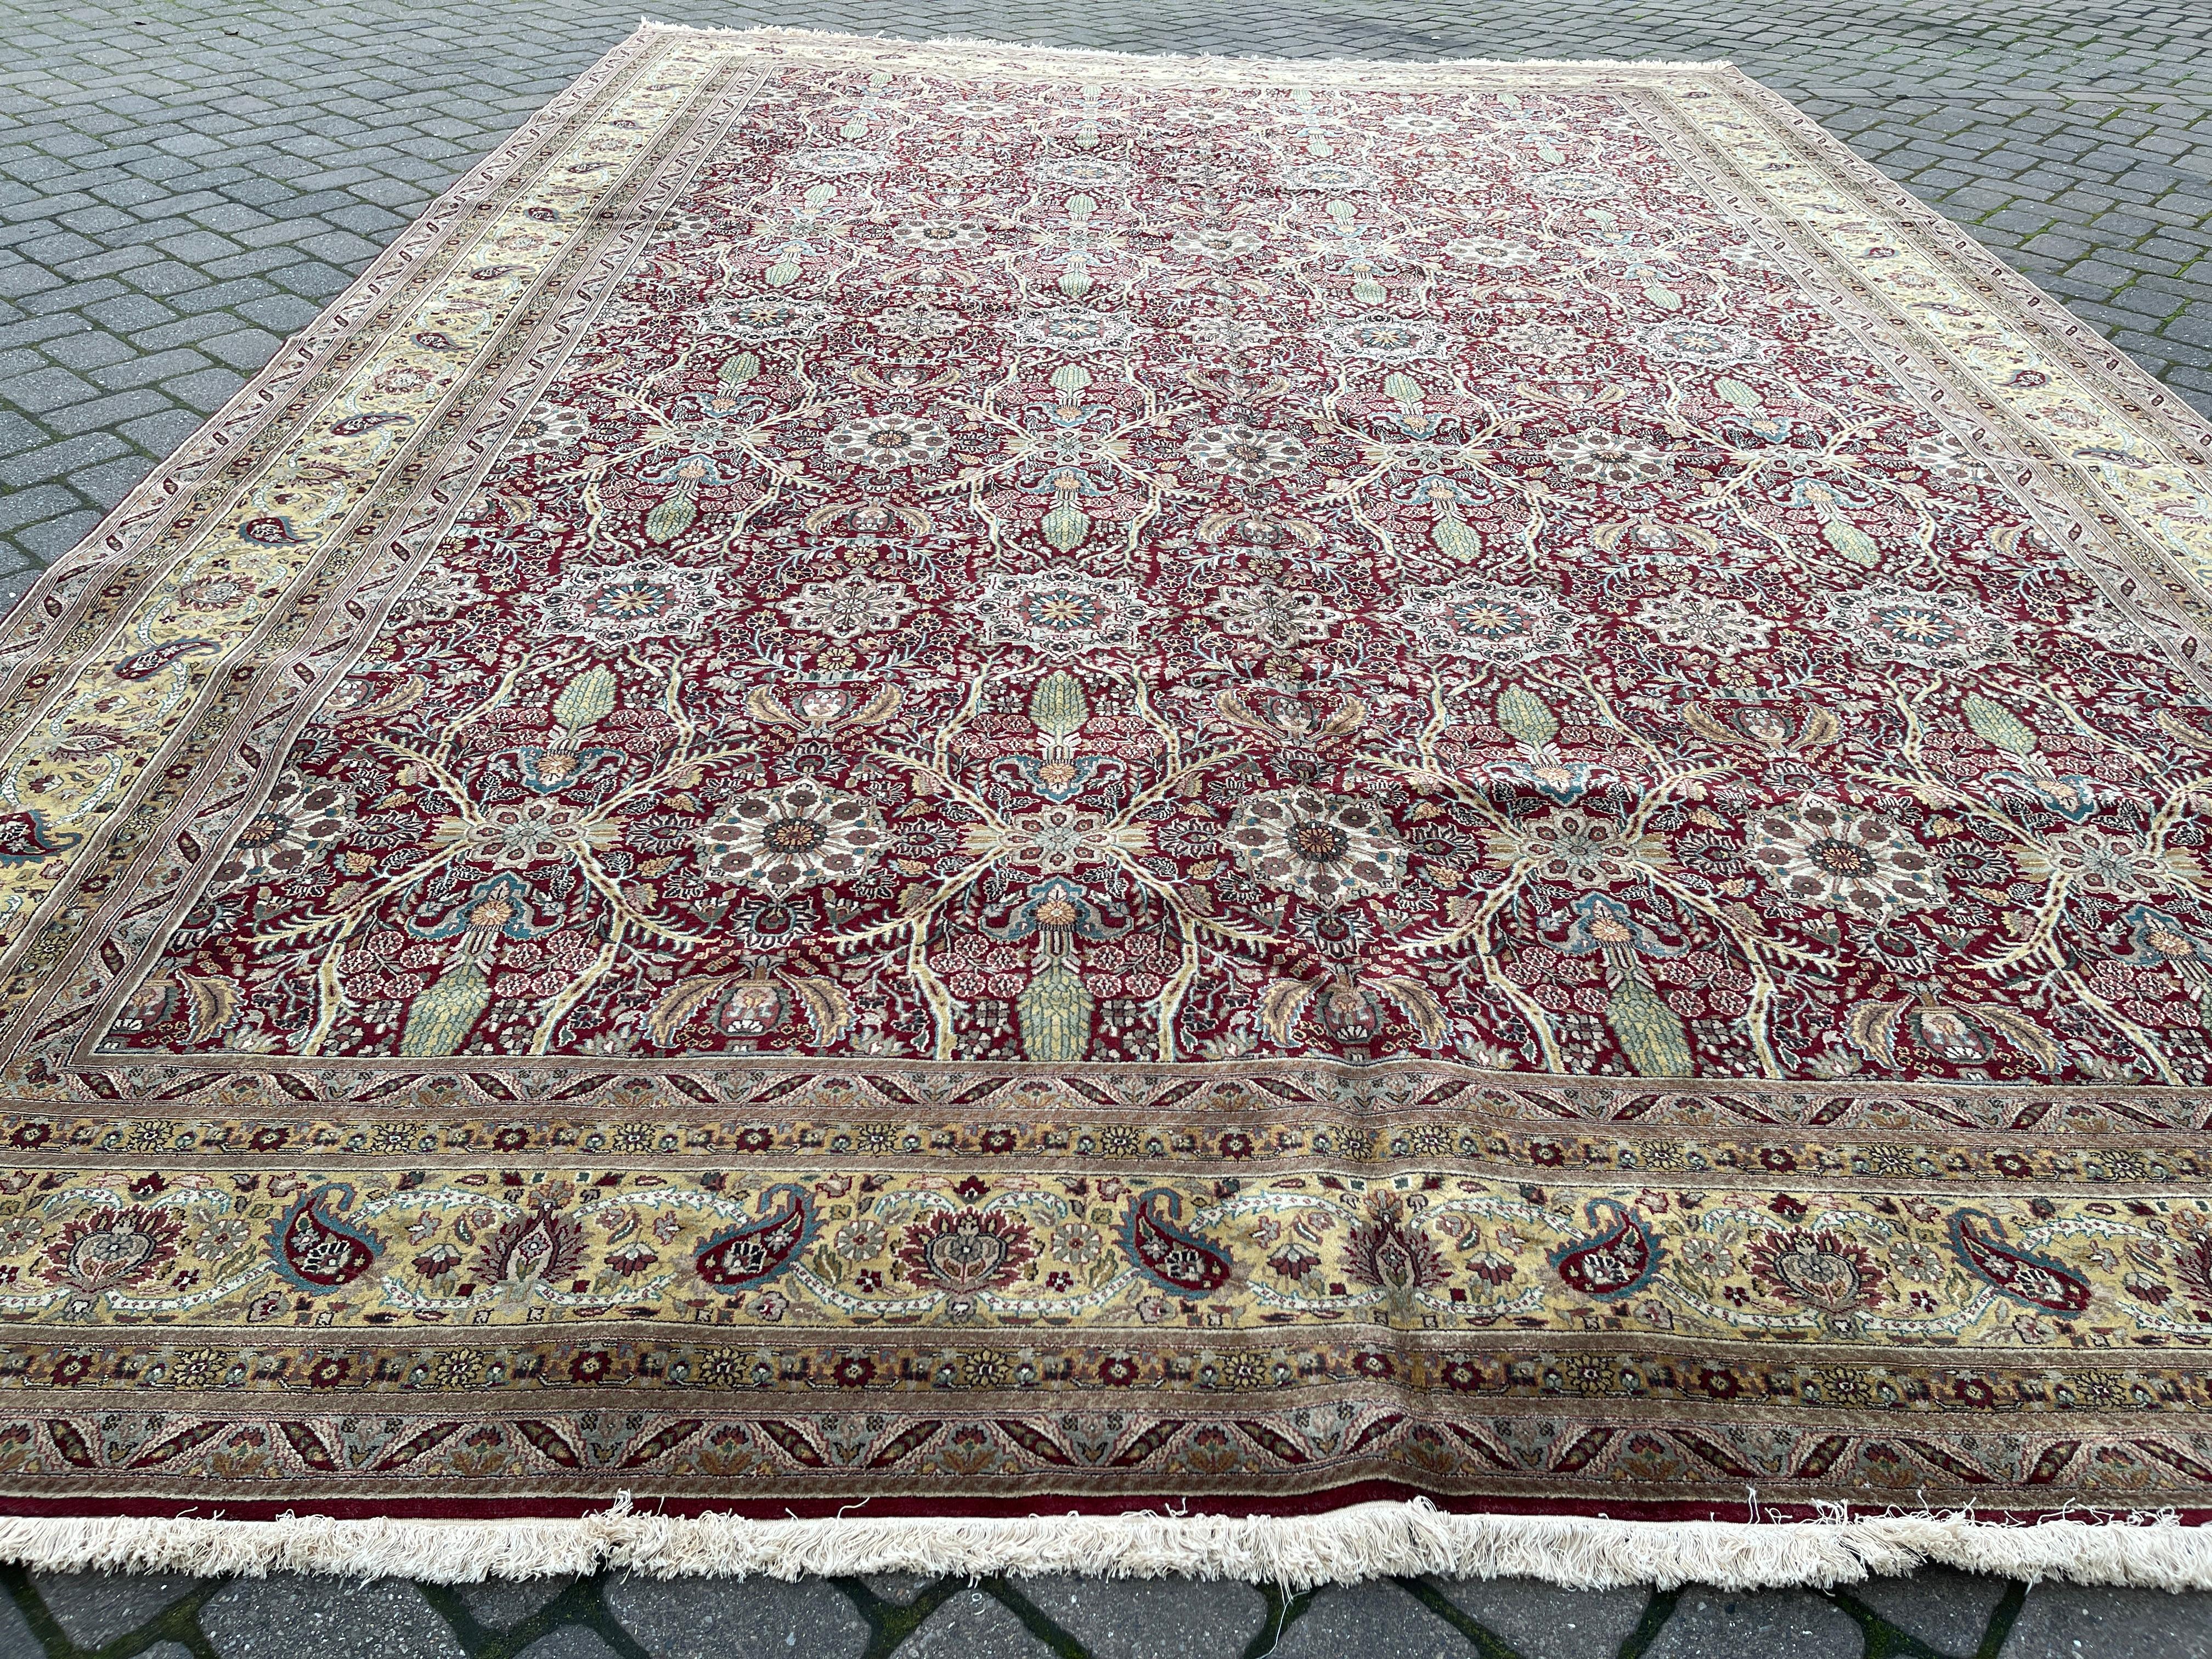 This Indian rug features a reds floral design  allowing you to switch up your decor. Add a touch of style to any room while also having the option to change things up to suit your mood. Beautiful and versatile, this rug is a must-have for any home.